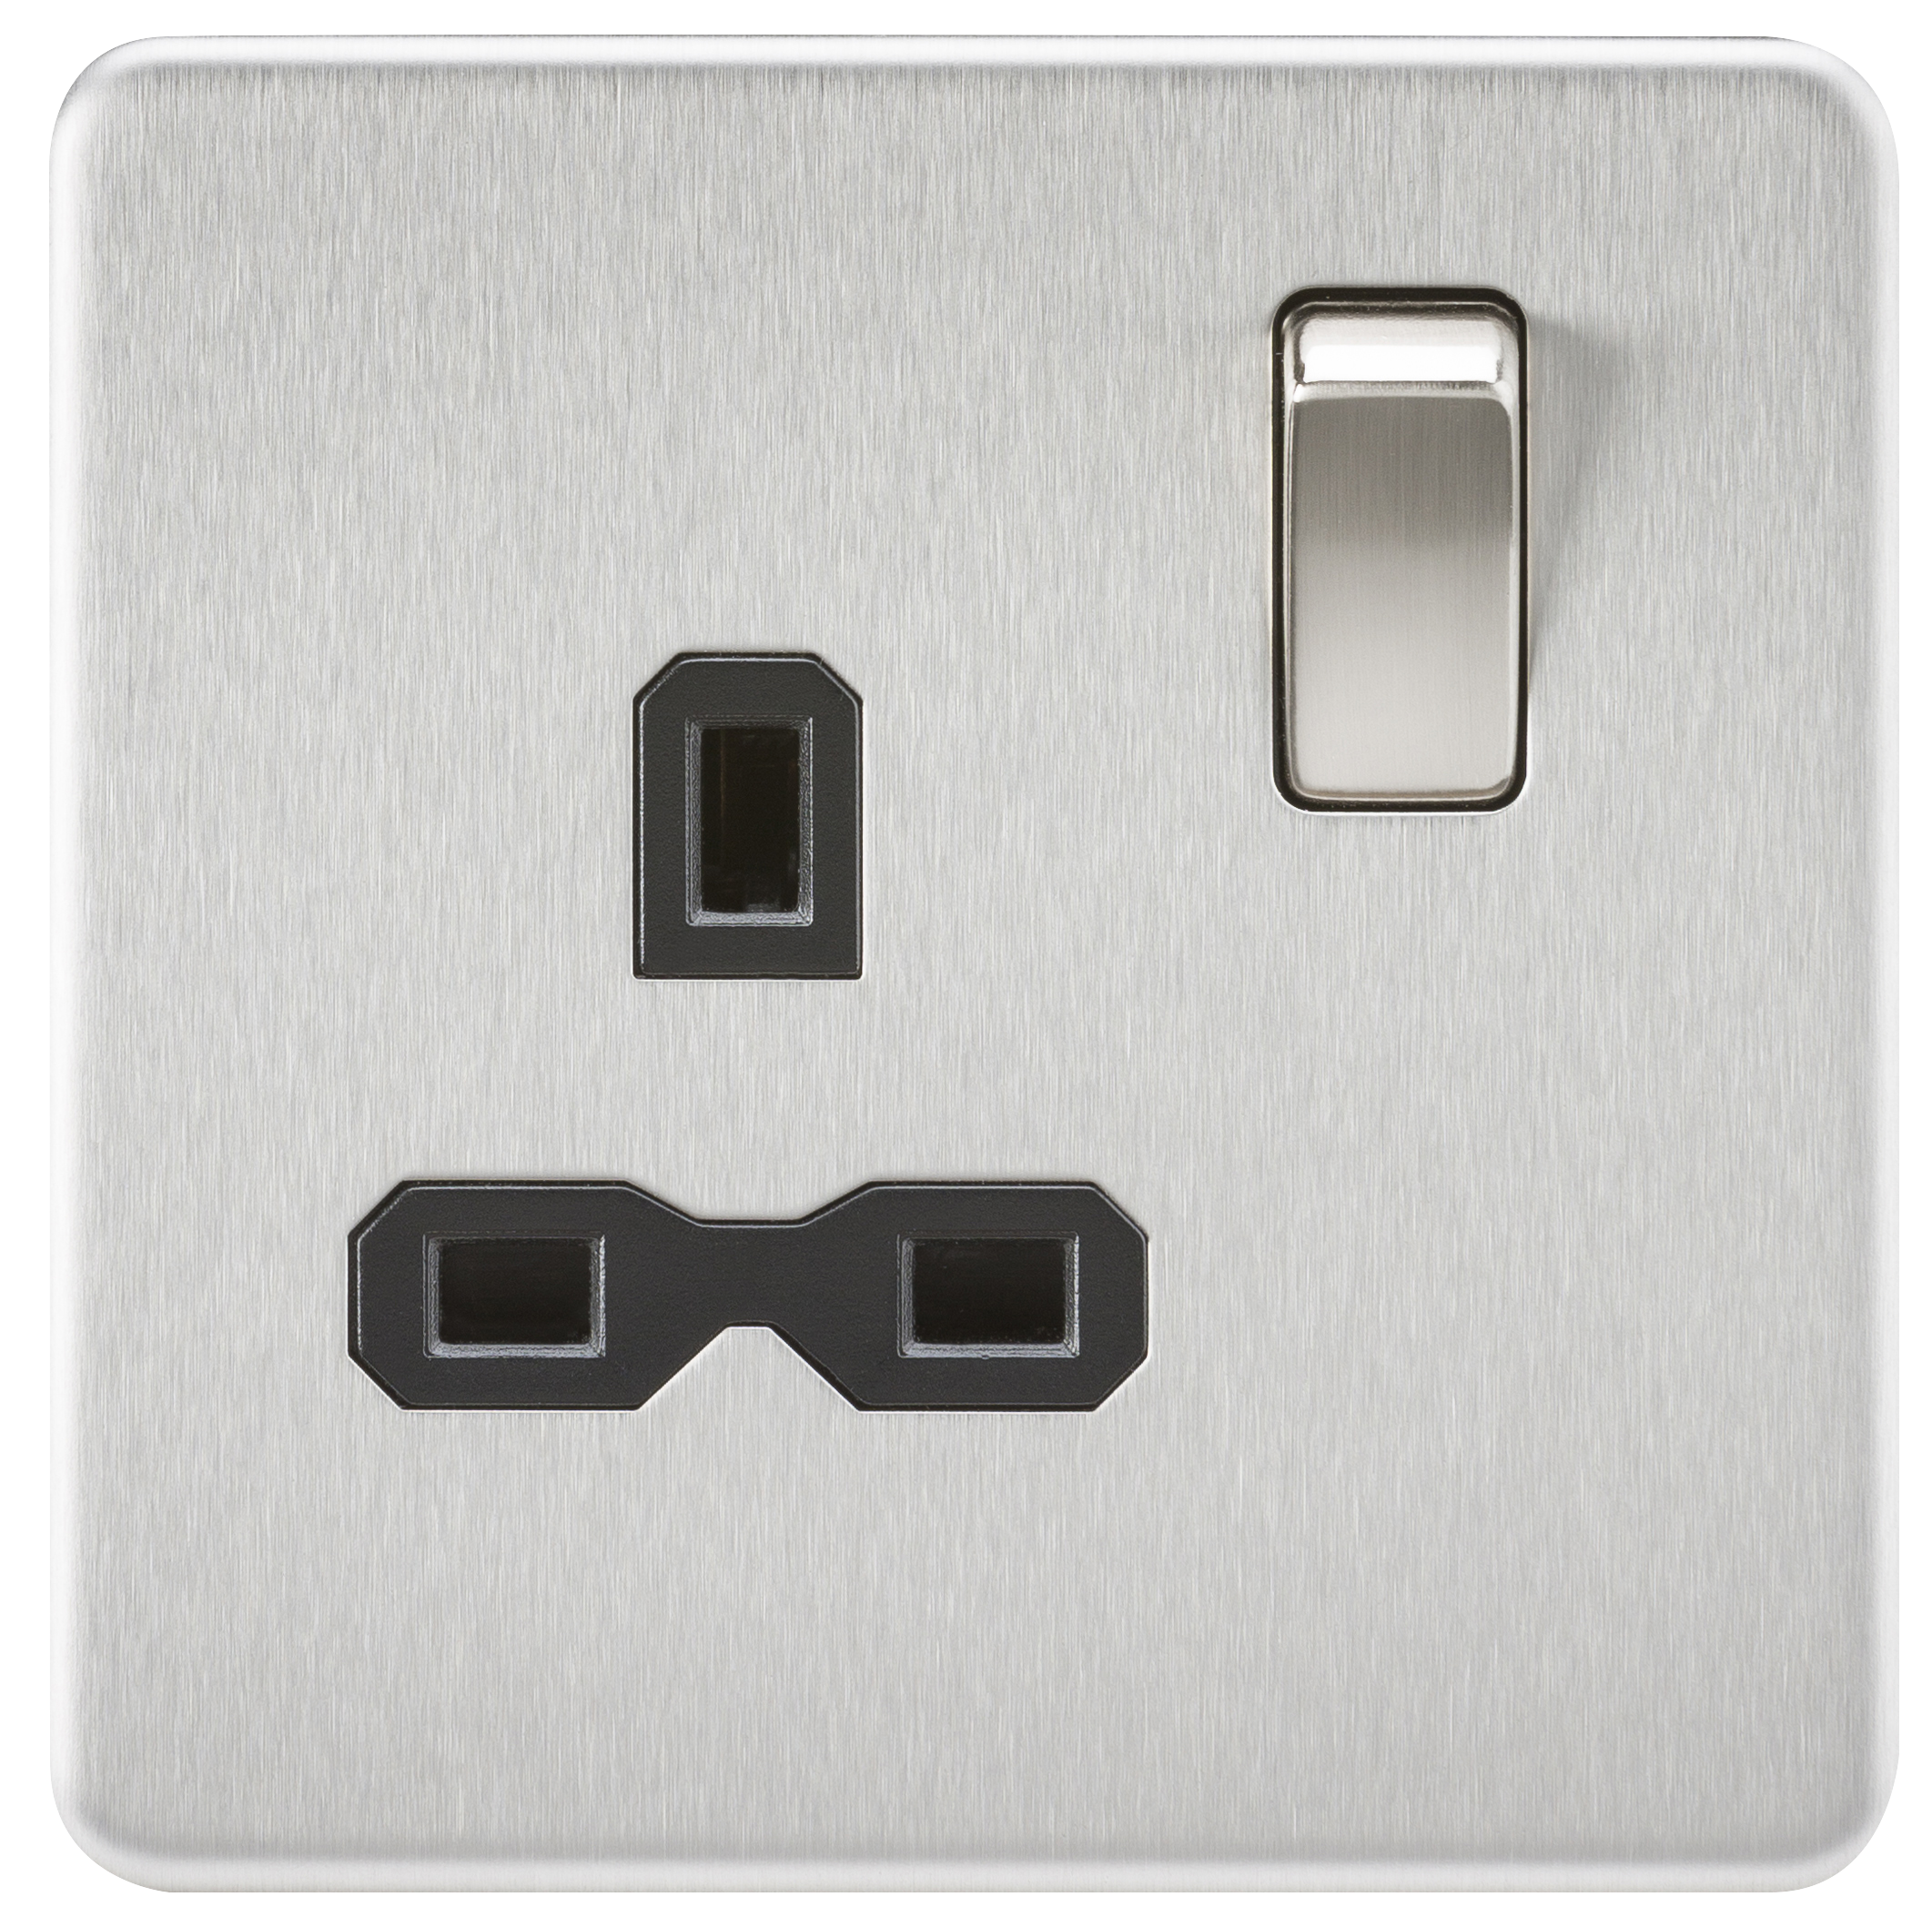 Screwless 13A 1G DP Switched Socket - Brushed Chrome With Black Insert - SFR7000BC 